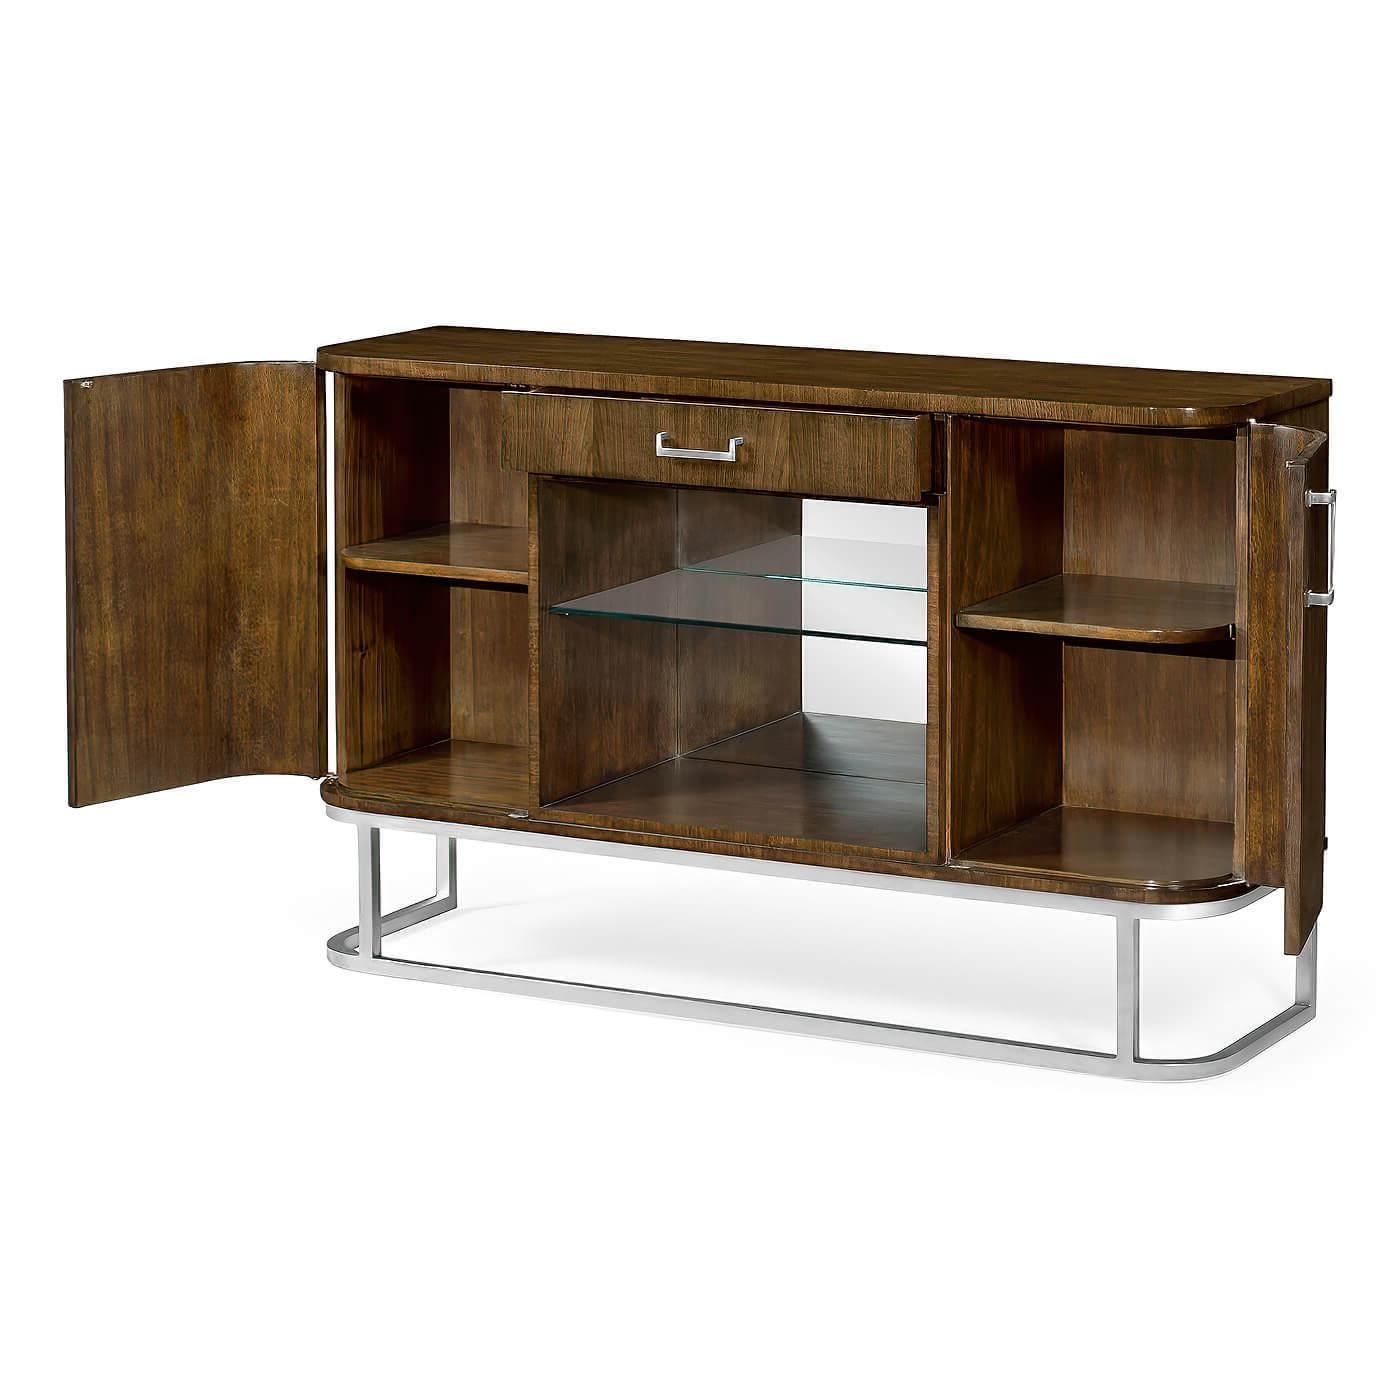 An Art Deco style two-door drinks buffet cabinet in American walnut with a single shelf in clear glass and a drawer with stainless steel handles. Interior design features two single cupboards with a single shelf in silver-leaf and stainless steel